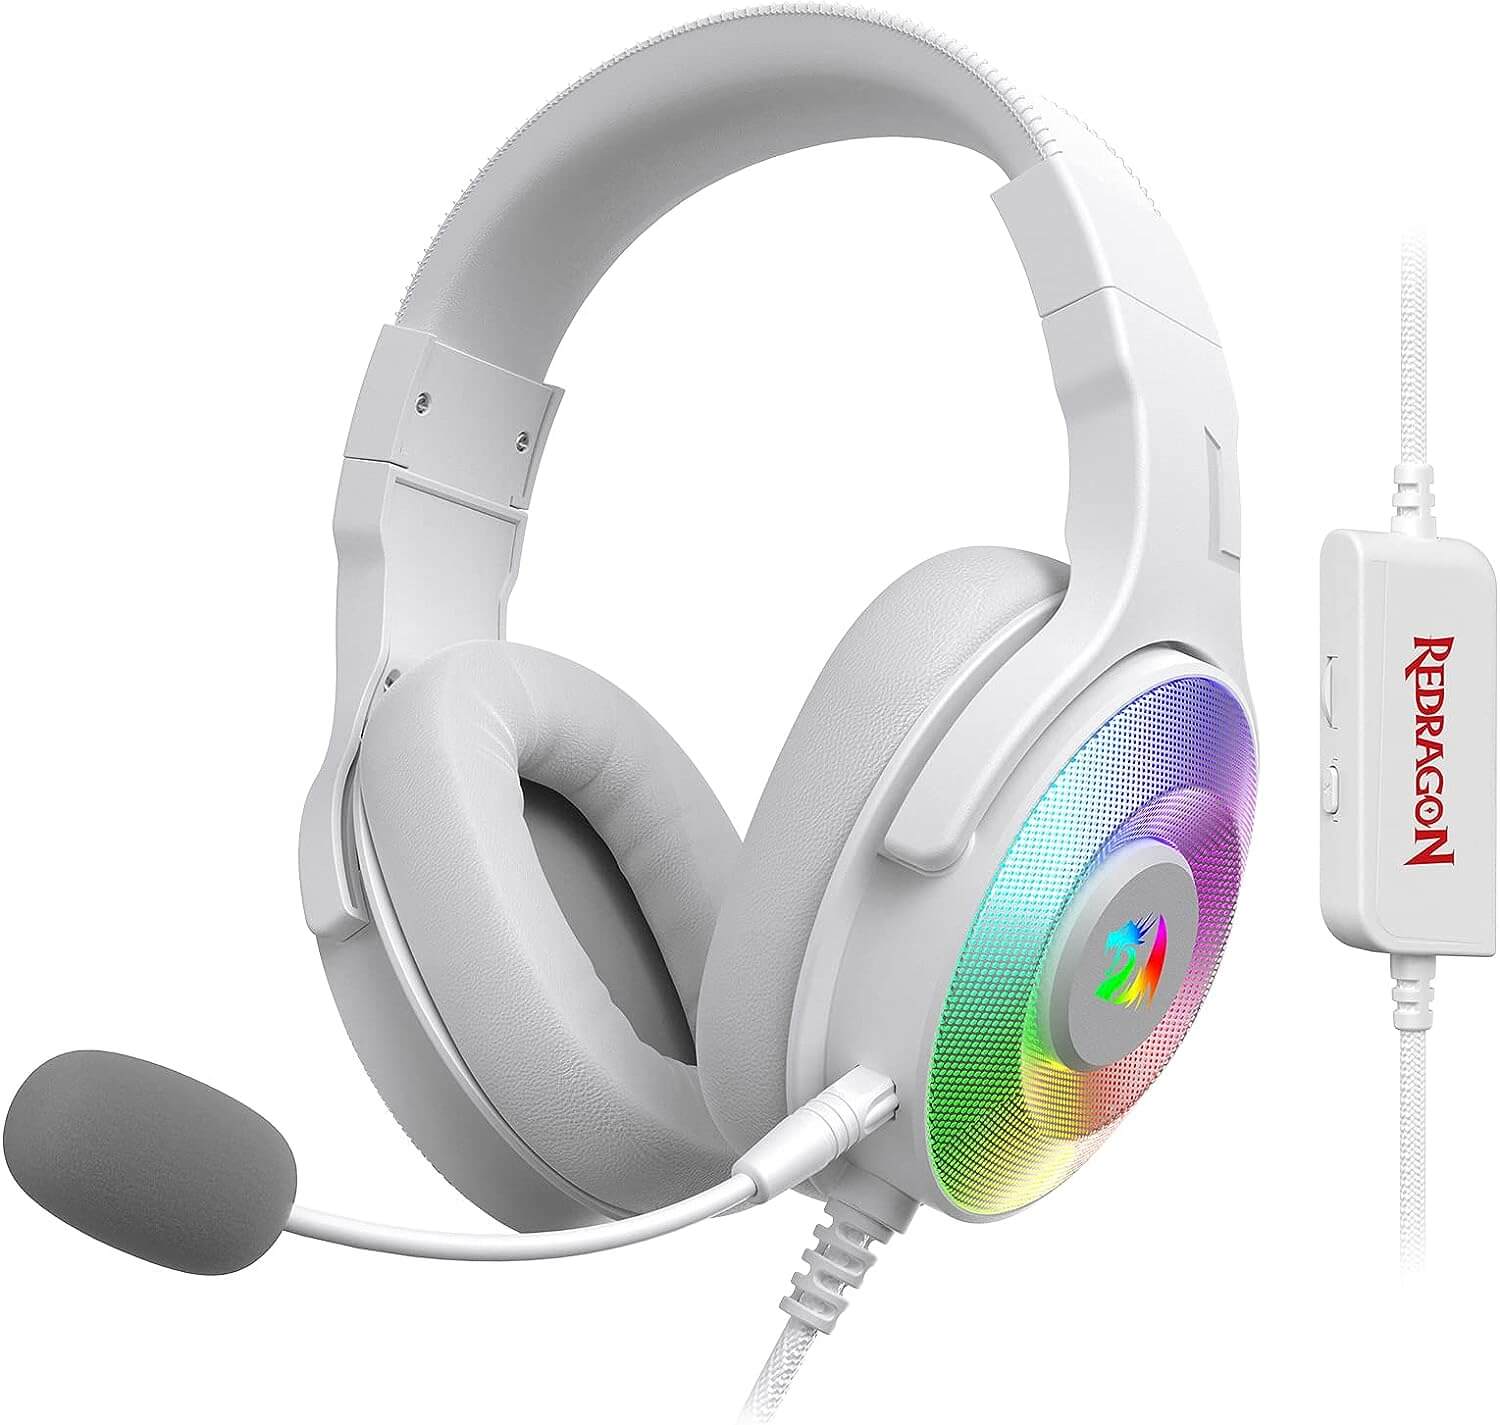 Redragon H350W-1 Pandora 2 Lunar White RGB Wired Gaming Headset, Dynamic RGB Backlight - Stereo Surround-Sound - 50MM Drivers - Detachable Microphone, Over-Ear Headphones Works for PC/PS4/XBOX One/NS